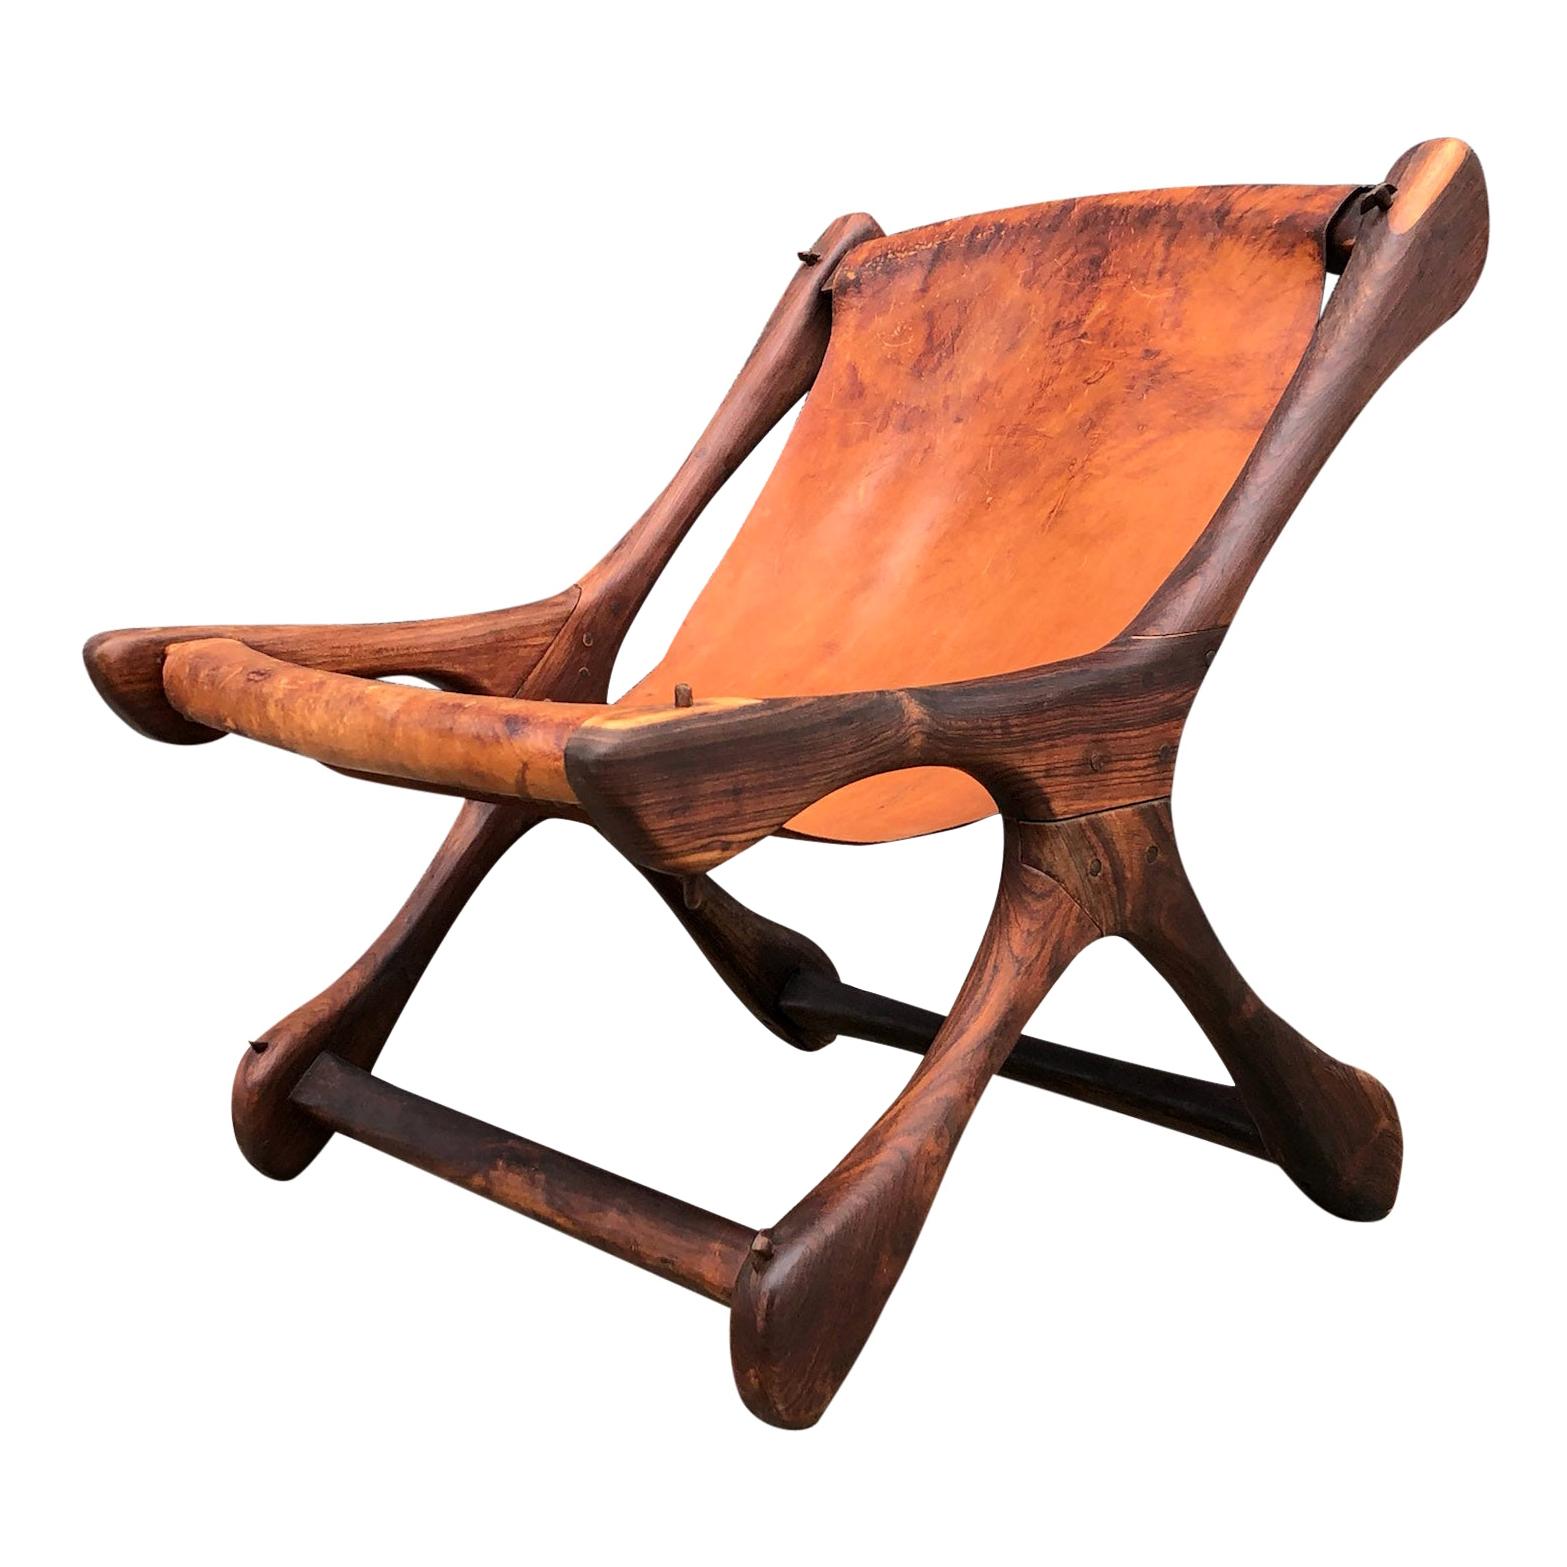 Mexican Midcentury Don Shoemaker Leather Sling Chair